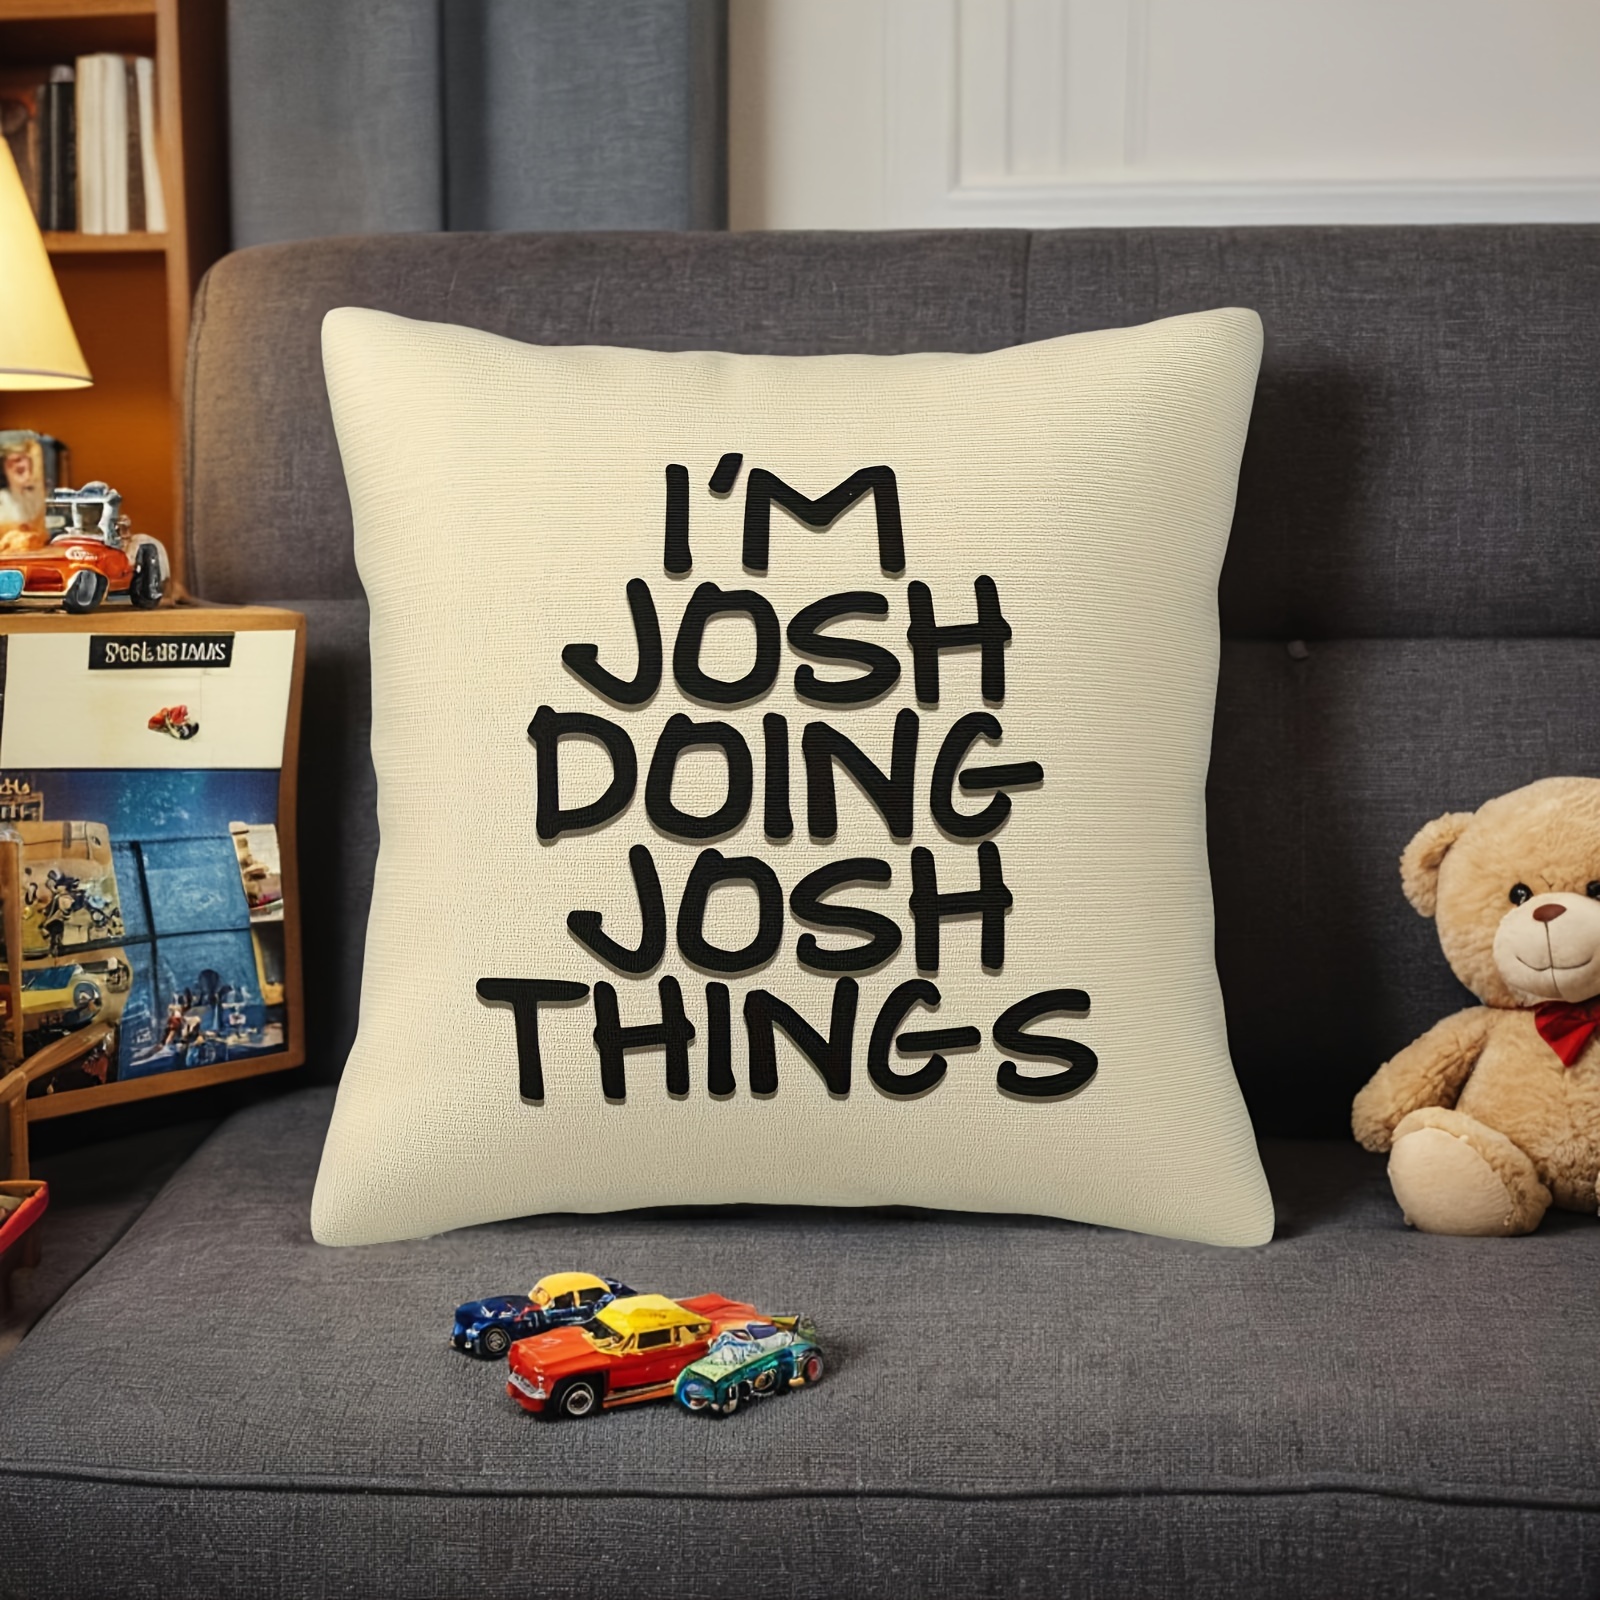 

1pc I'm Josh Doing Josh Things Decorative Throw Pillow Covers 18x18in Cute Pattern A Gift For My Friend Soft Plush Couch Pillow Covers For Home